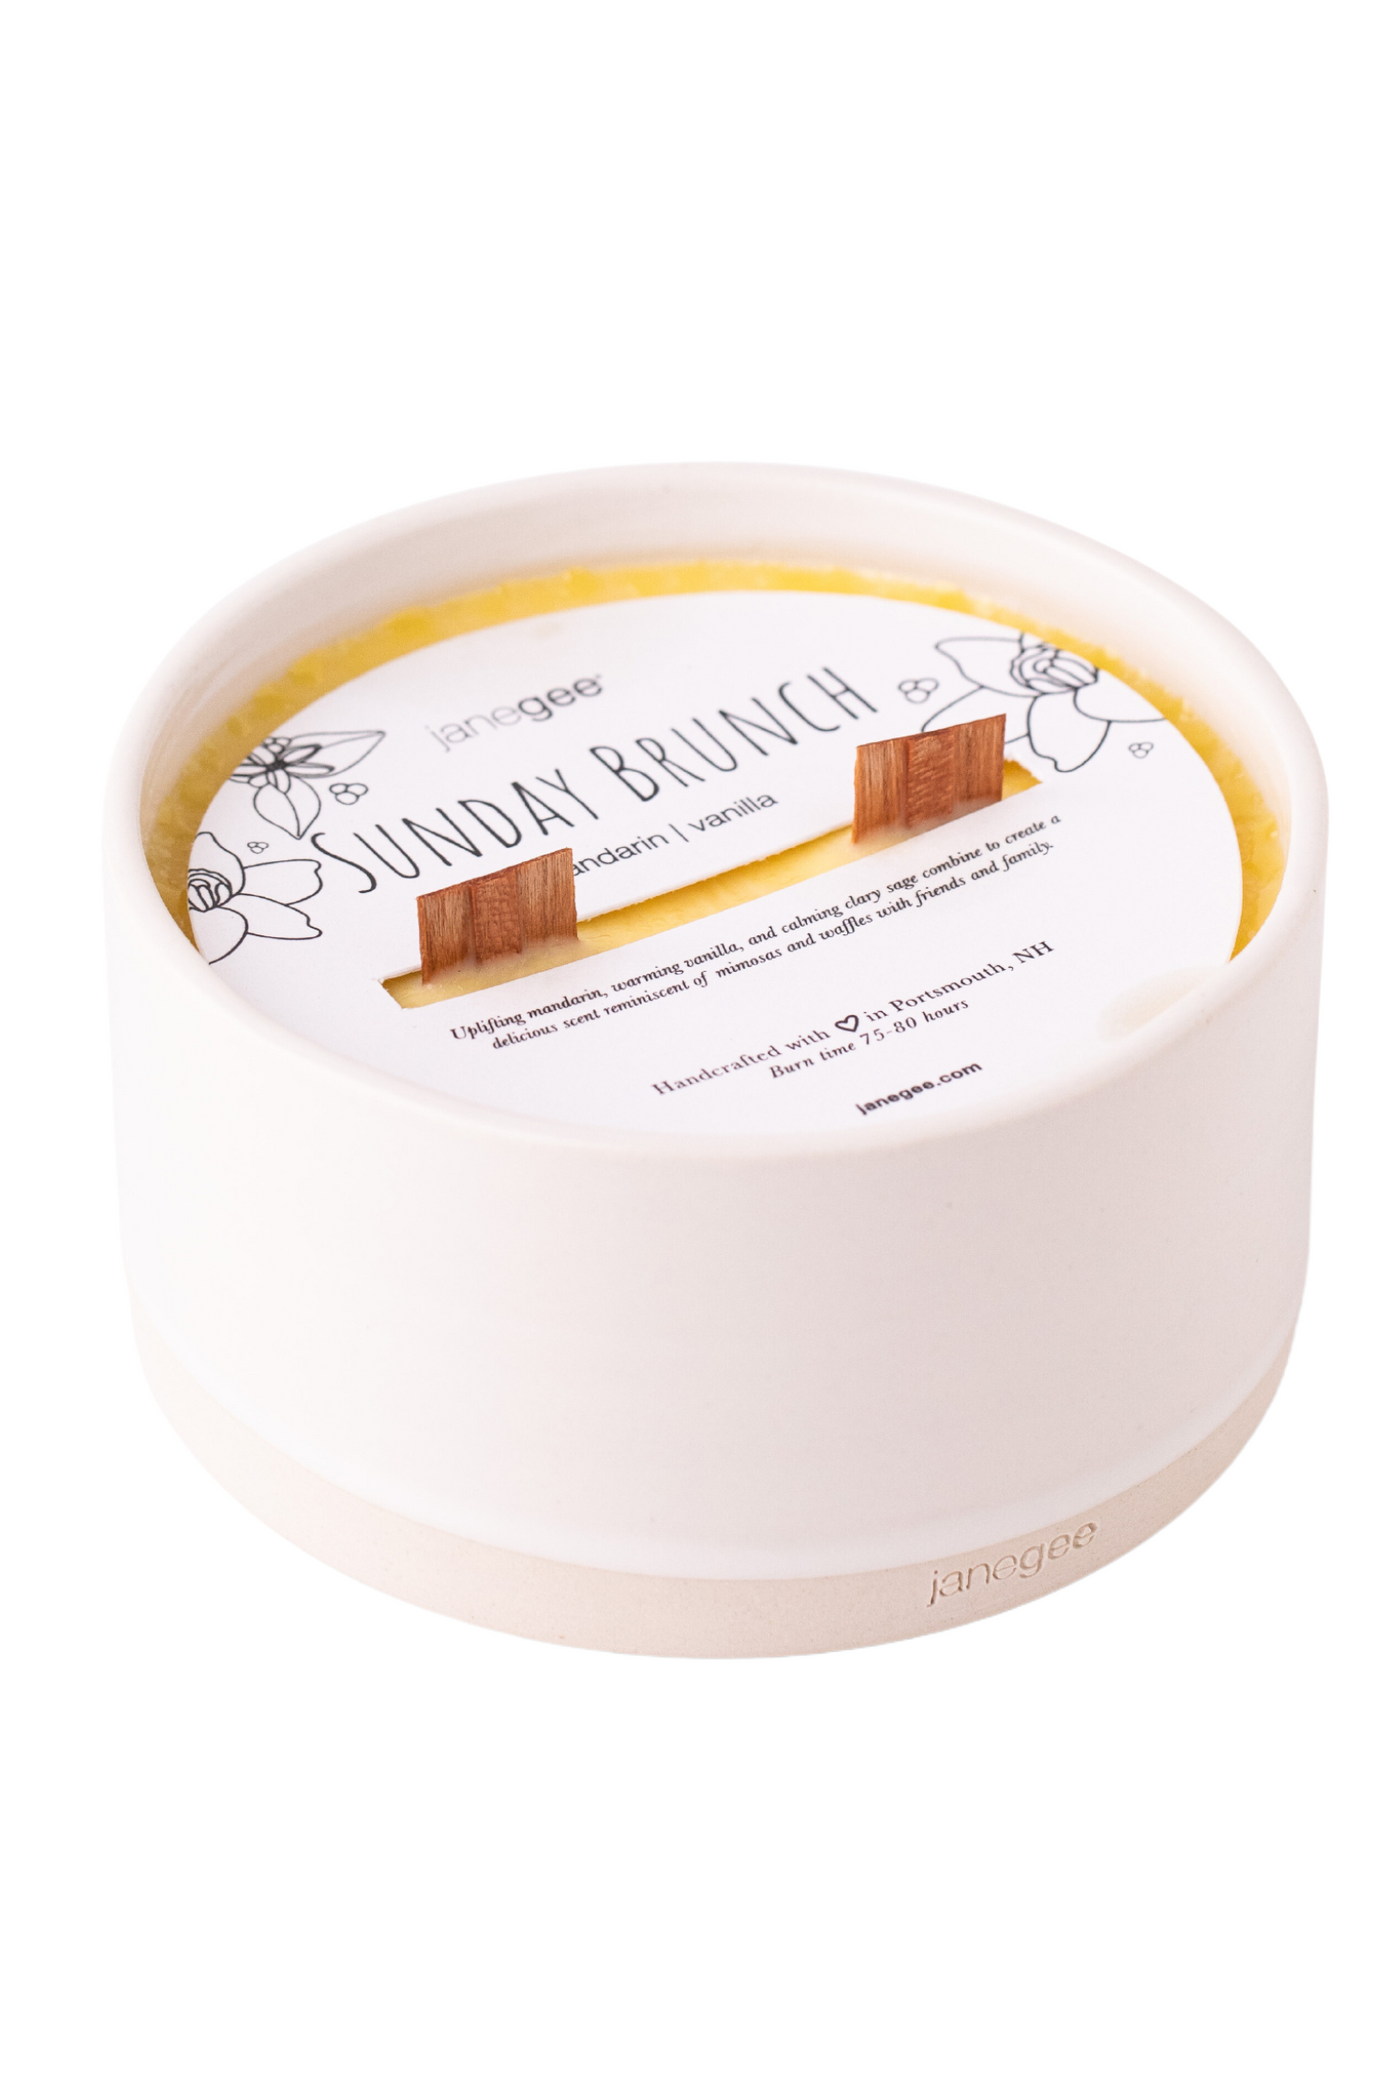 janegee Deluxe Sunday Brunch Aromatherapy Candle